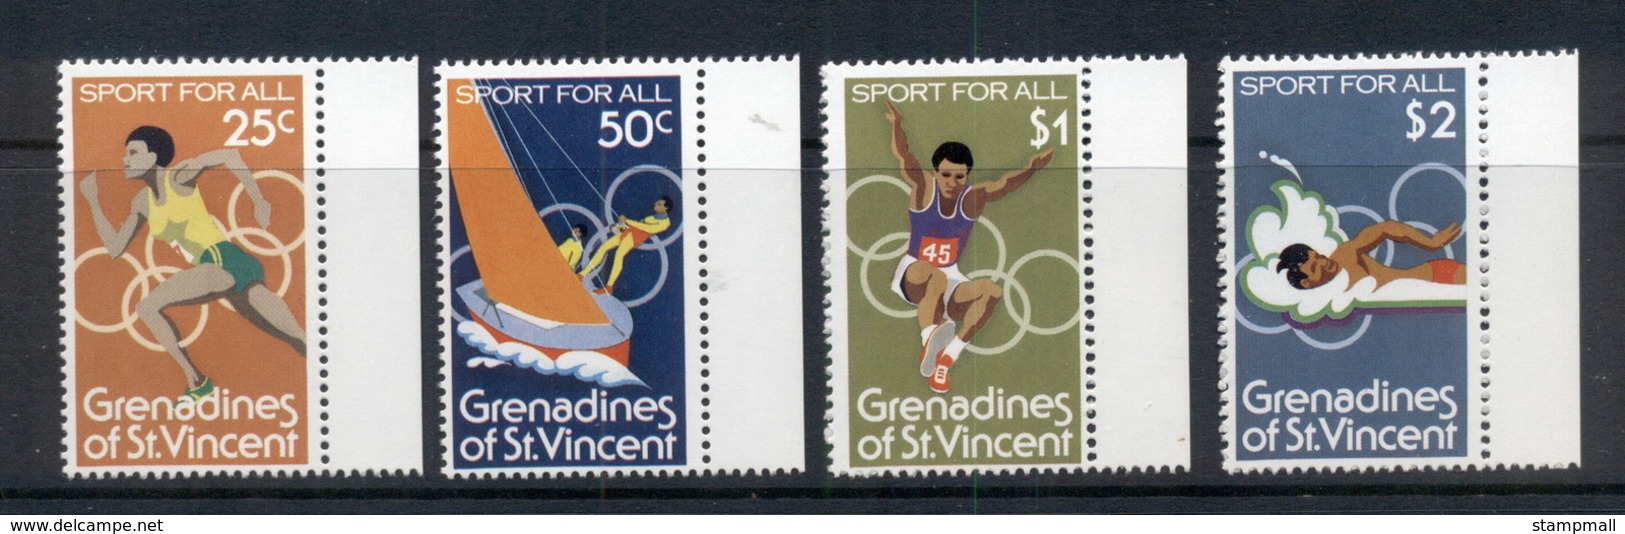 St Vincent Grenadines 1980 Olympics, Sport For All MUH - St.Vincent & Grenadines